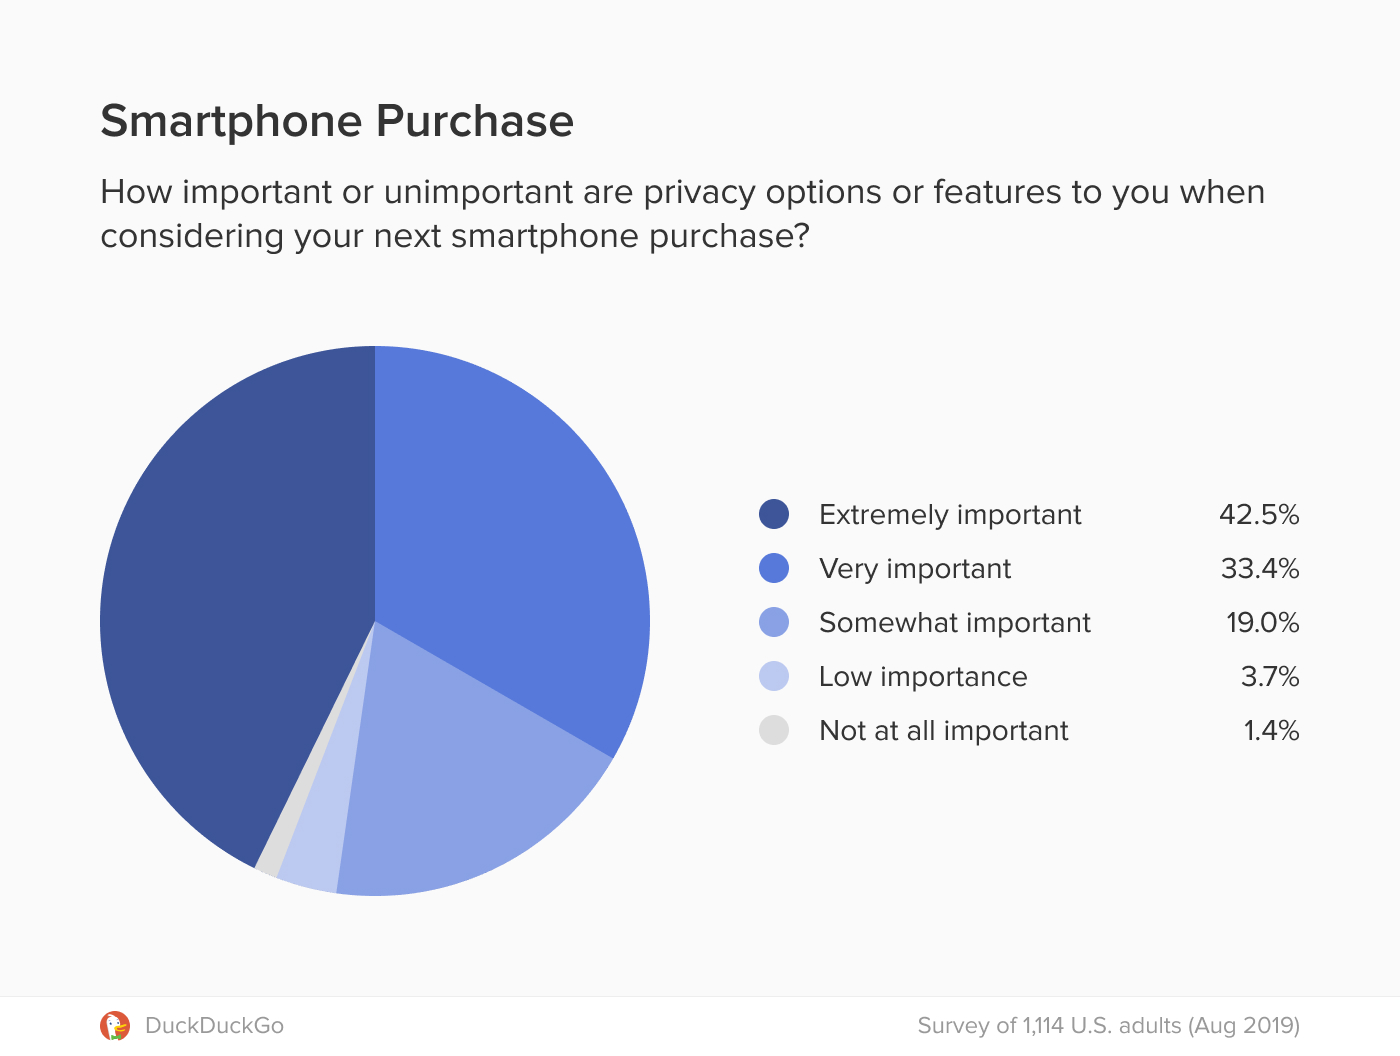 Chart showing importance of smartphone privacy features for respondents.